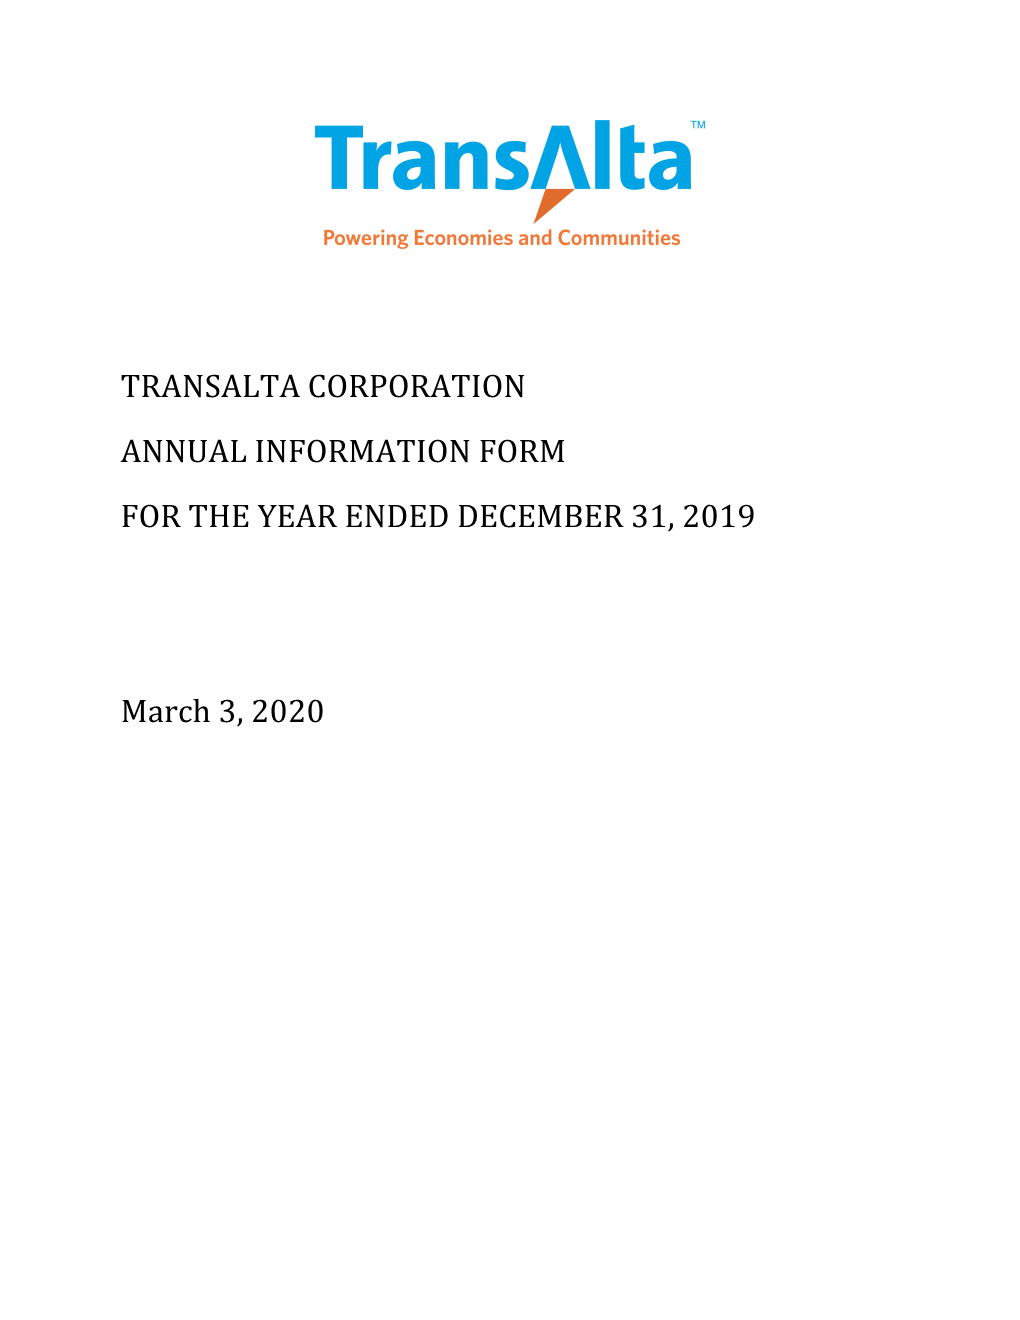 Transalta Corporation Annual Information Form for the Year Ended December 31, 2019